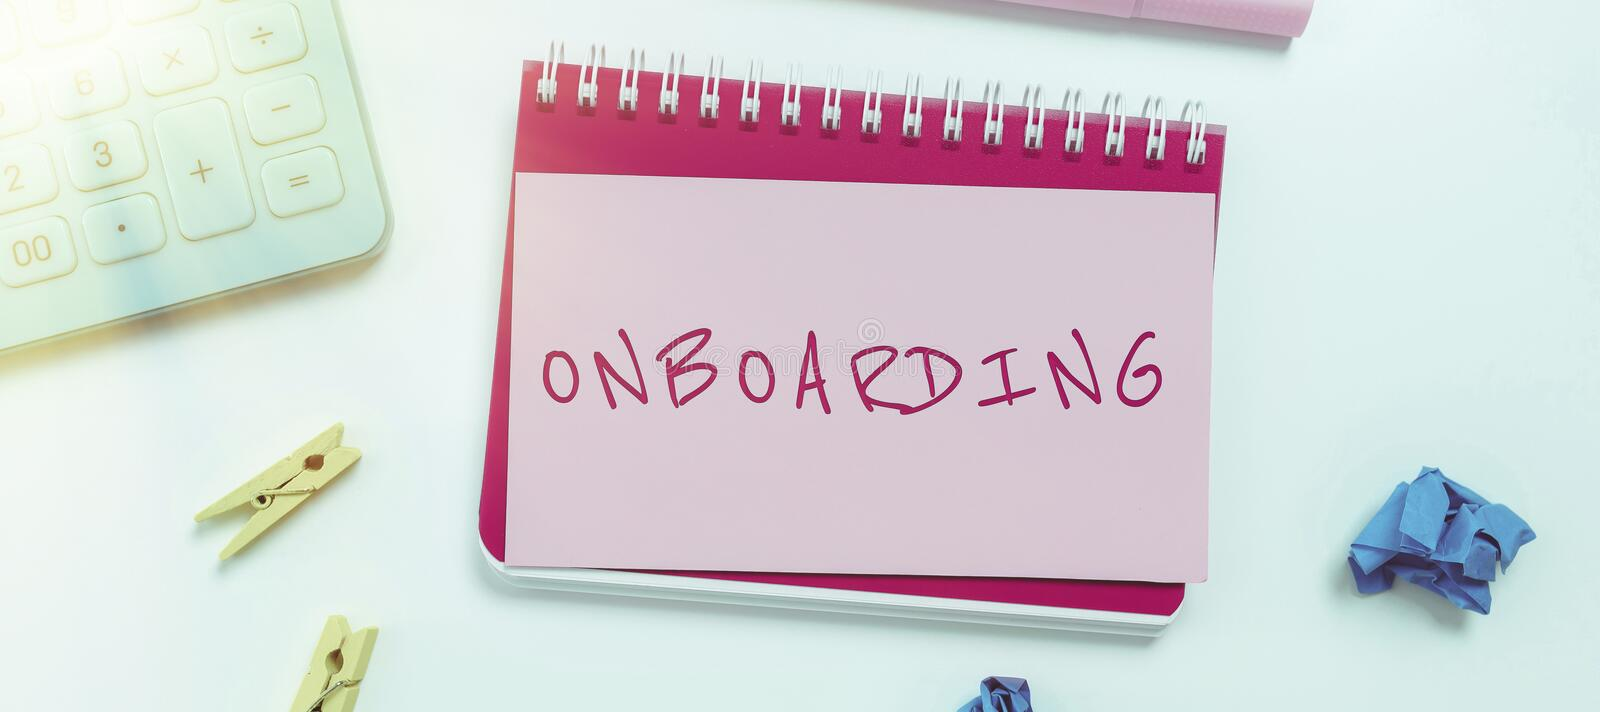 8 Guidelines for Successful Staff Onboarding
